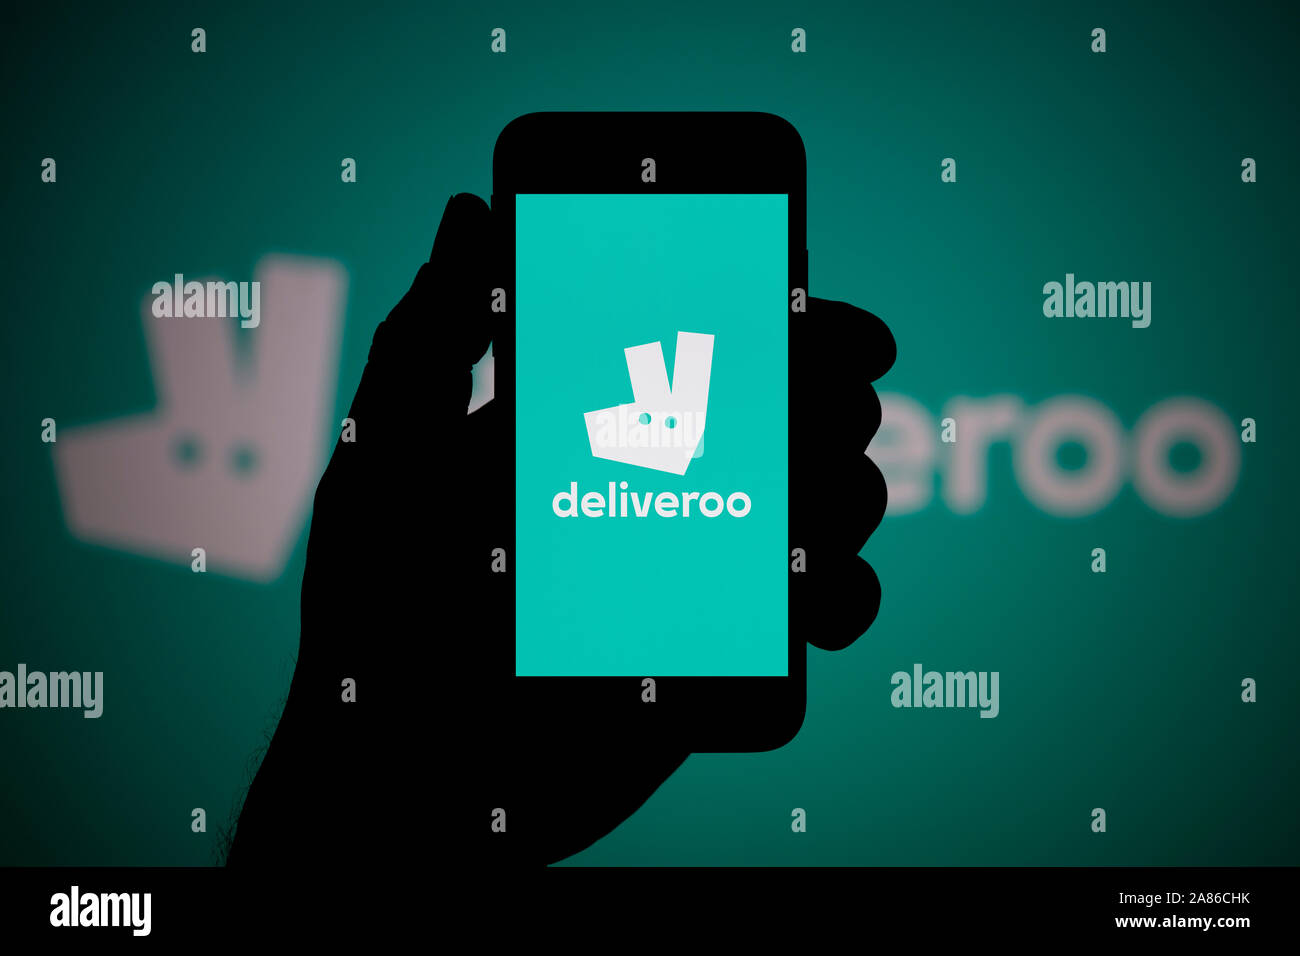 A man looks at his iPhone which displays the Deliveroo logo, with the same logo in the background (Editorial use only). Stock Photo